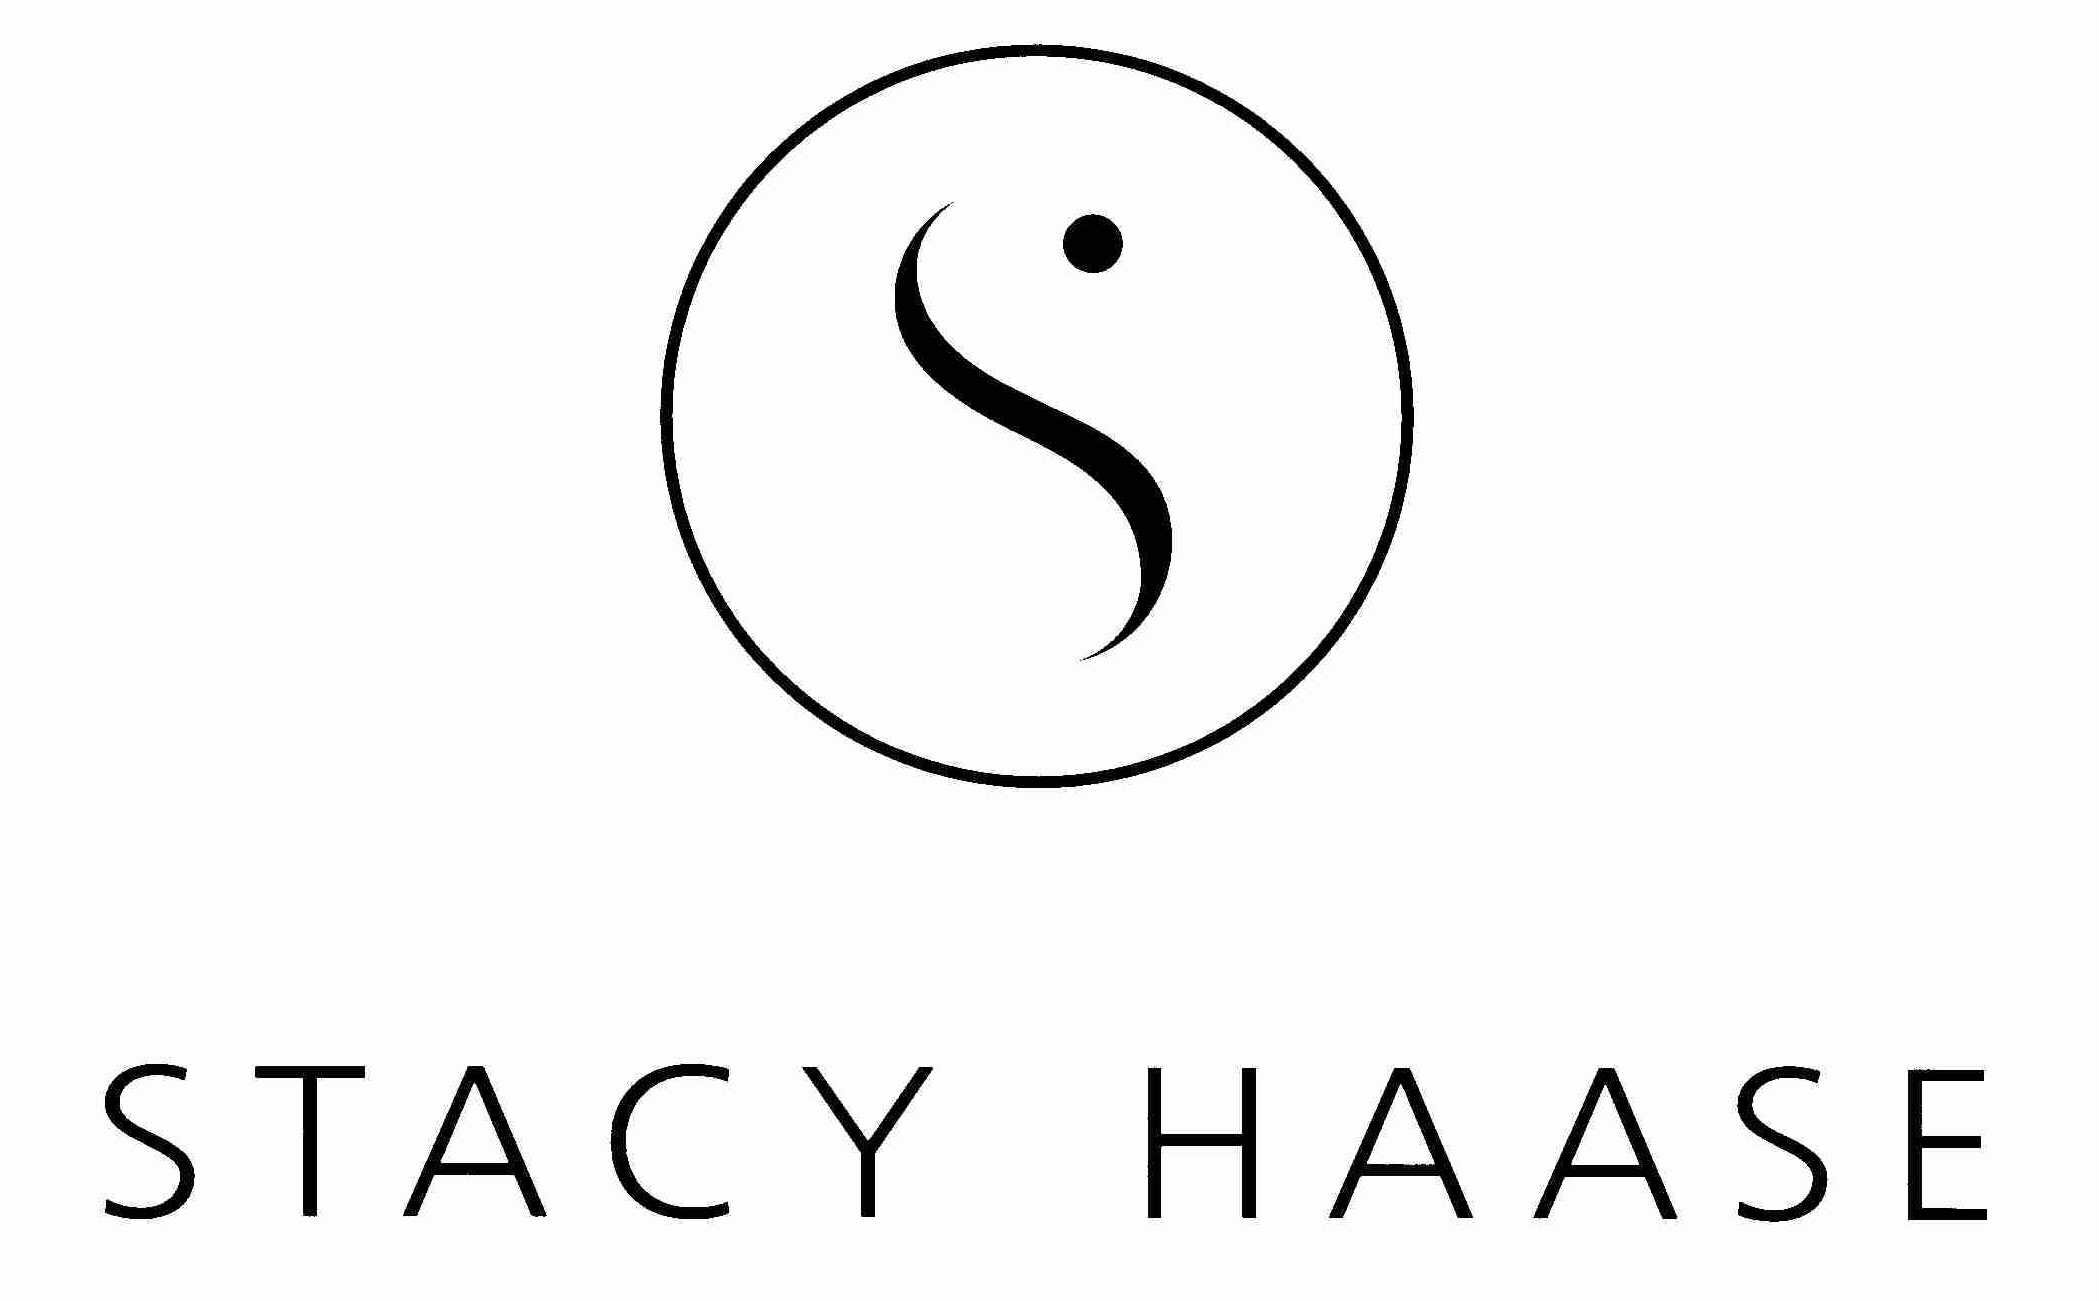 STACY HAASE